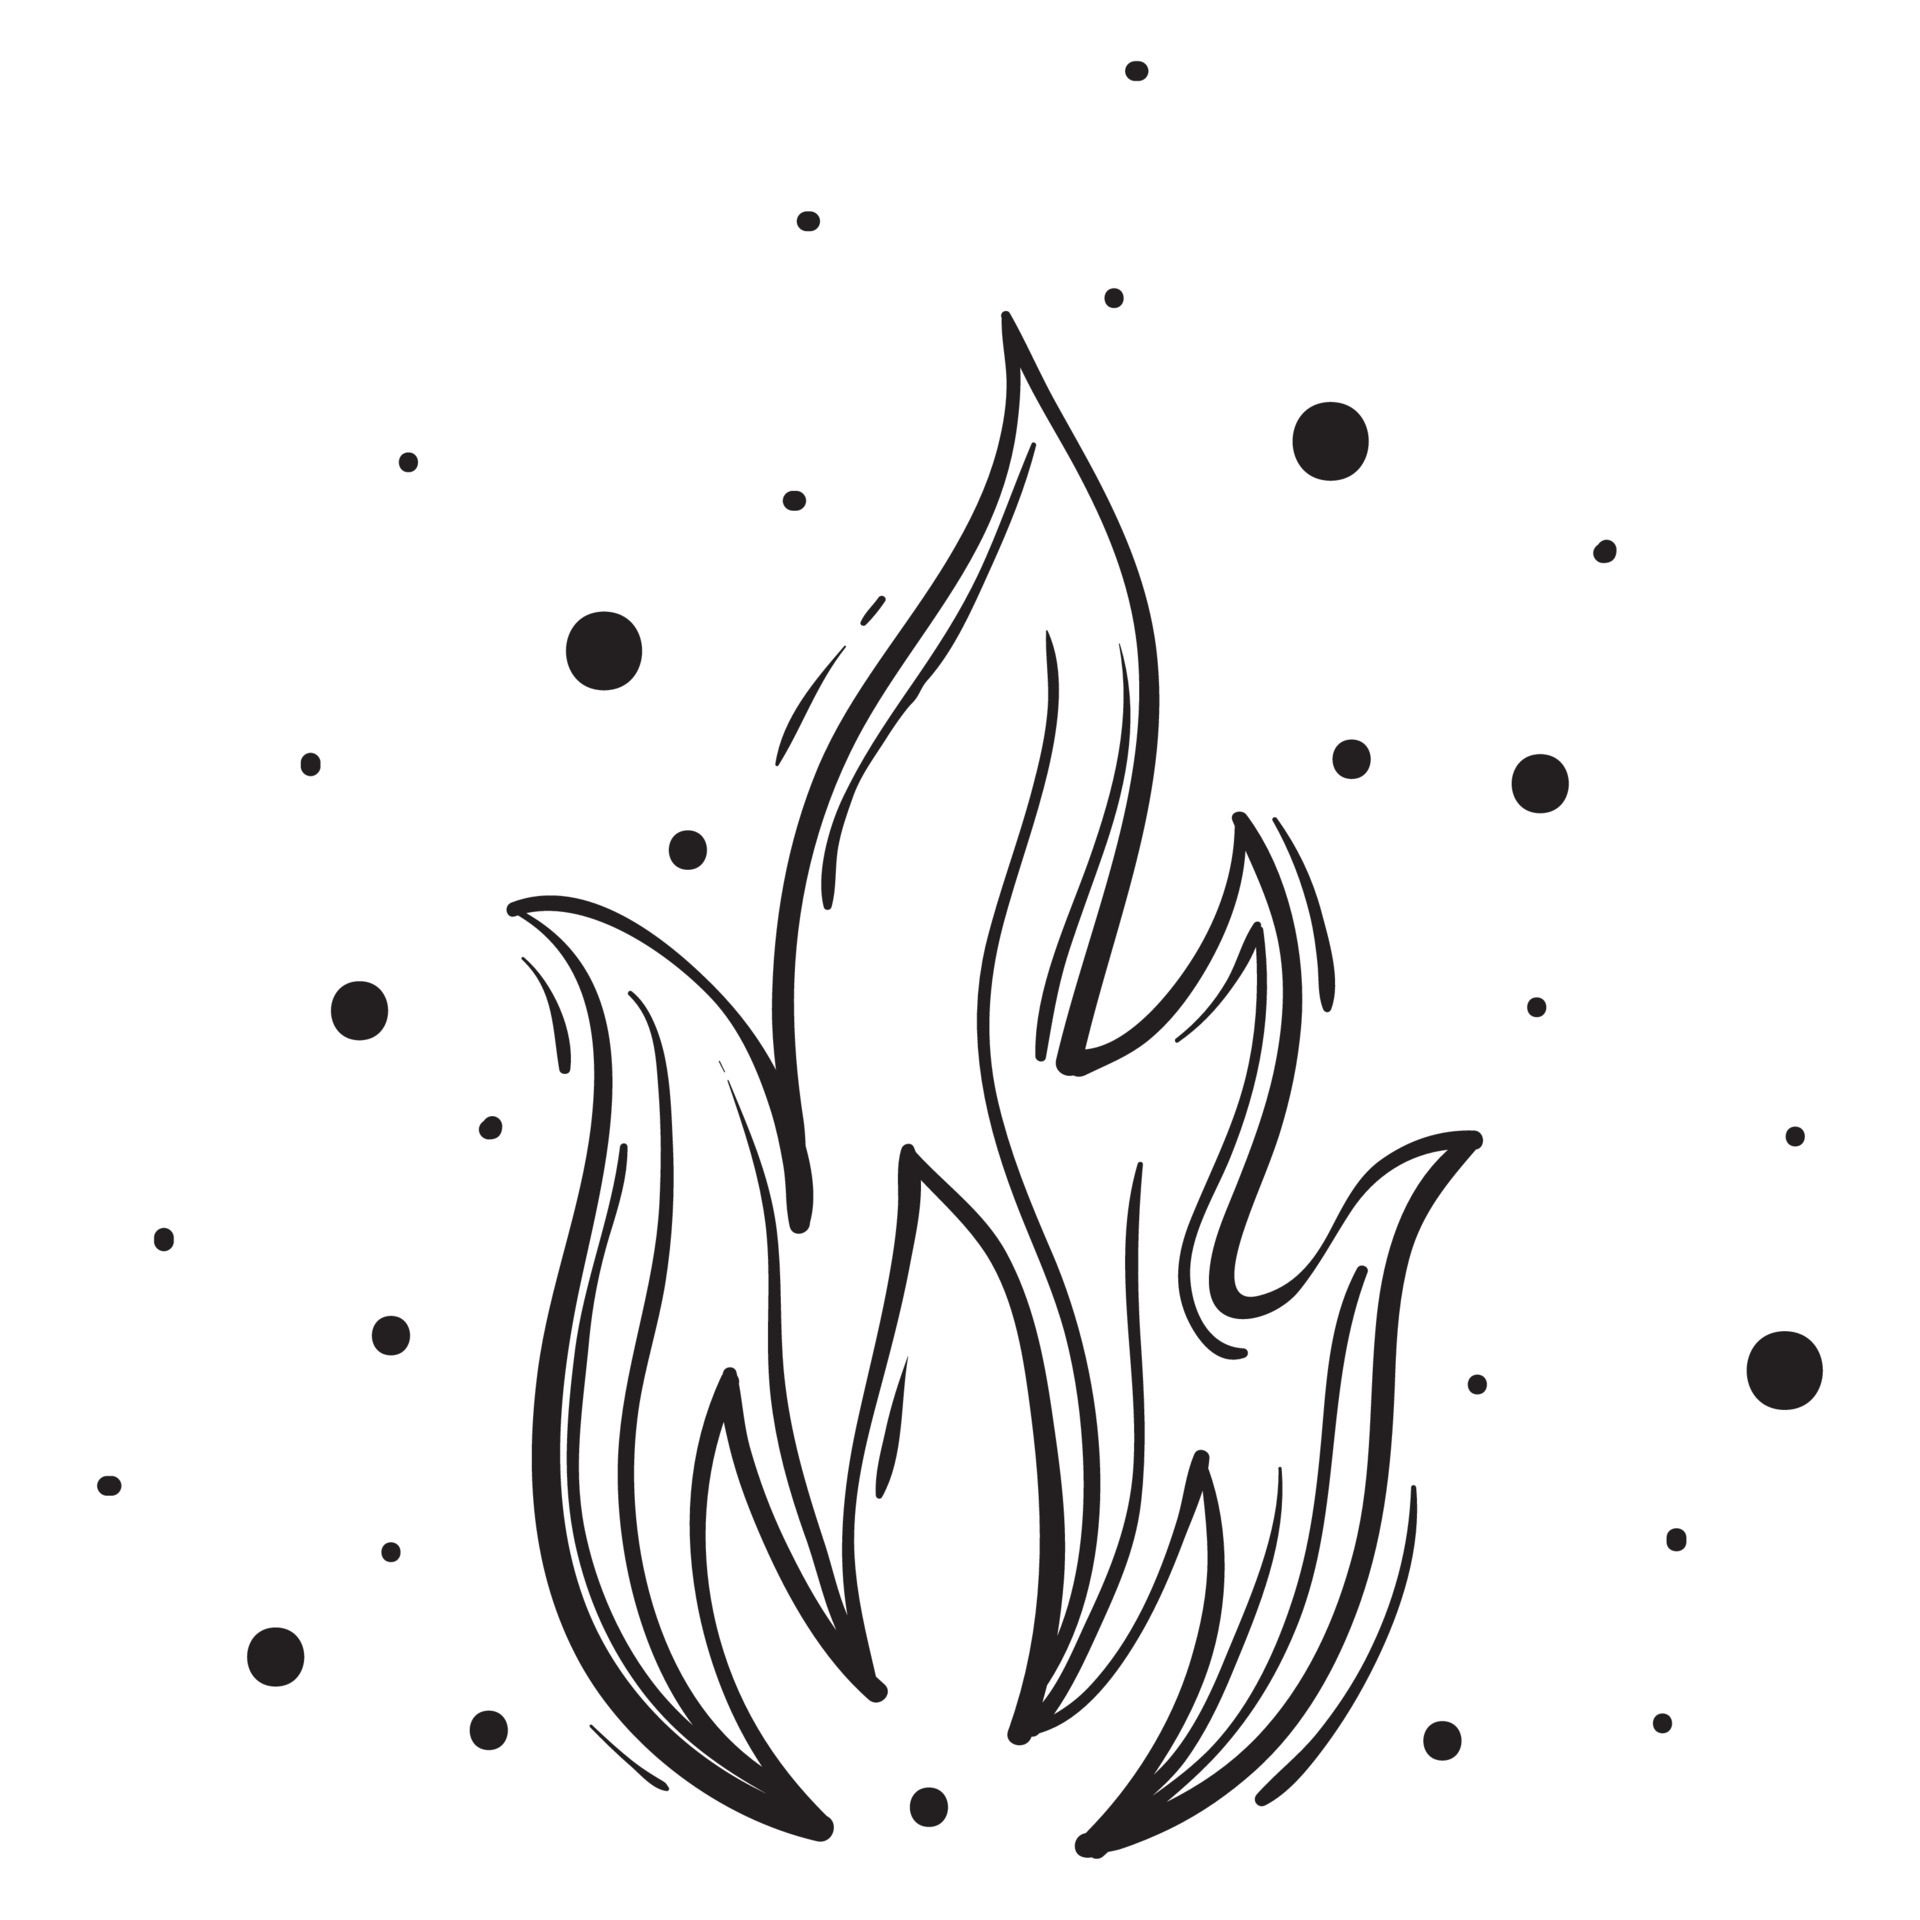 Cartoon Flame Drawing - How To Draw A Cartoon Flame Step By Step